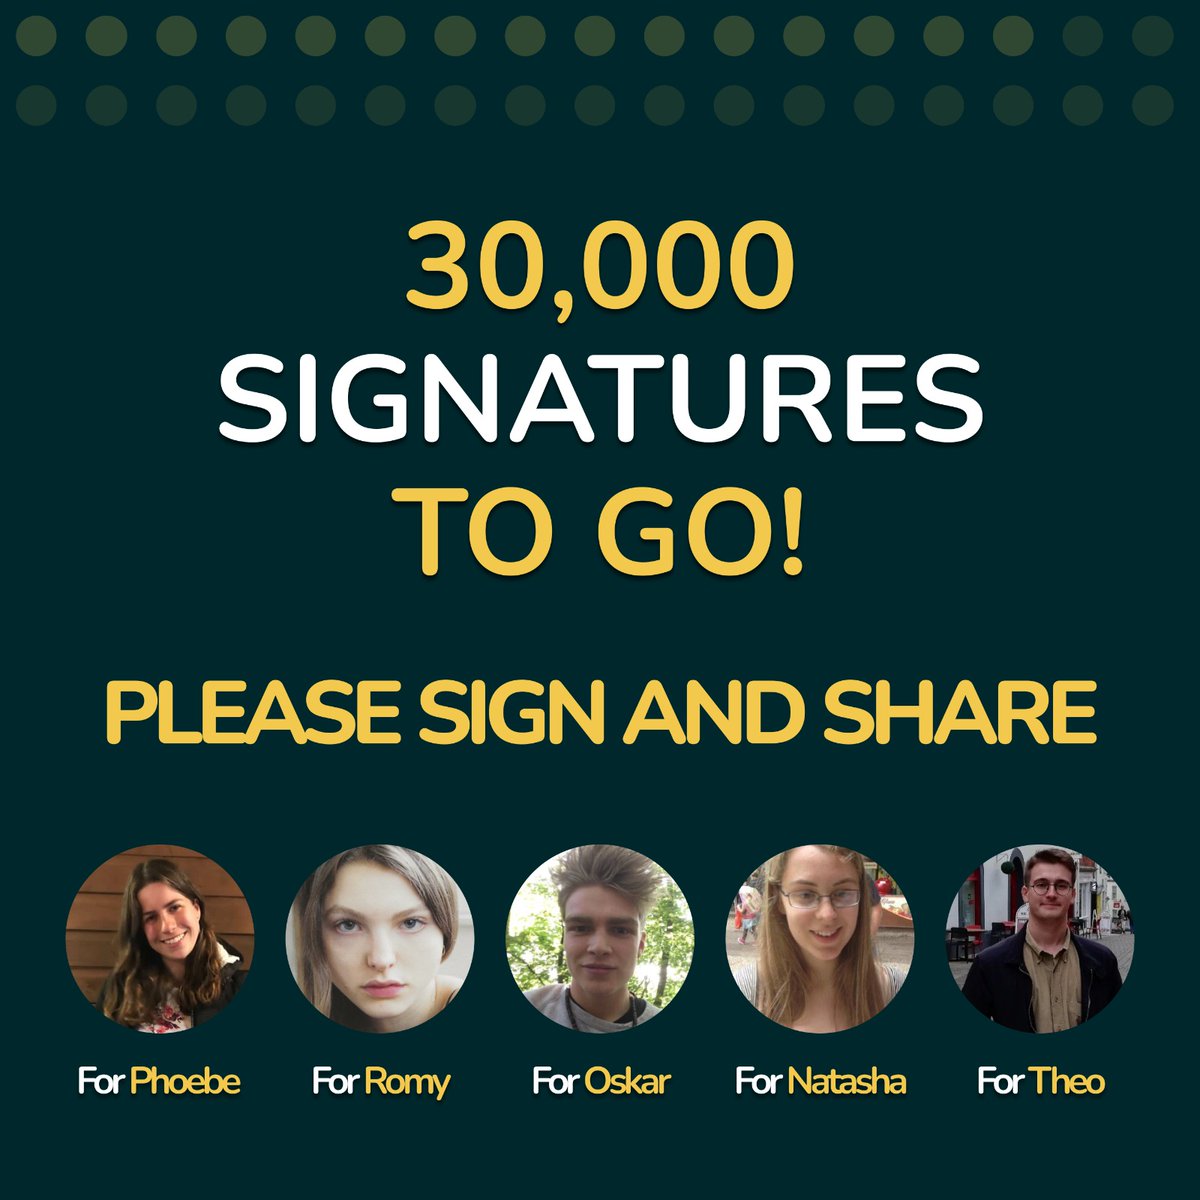 Only 30,000 signatures left to reach our goal and make a real change.

Please sign and share the petition now.

petition.parliament.uk/petitions/6228…

#ForThe100 #petition #highereducation #mentalhealth #student #studentmentalhealth #mentalhealth #suicideprevention